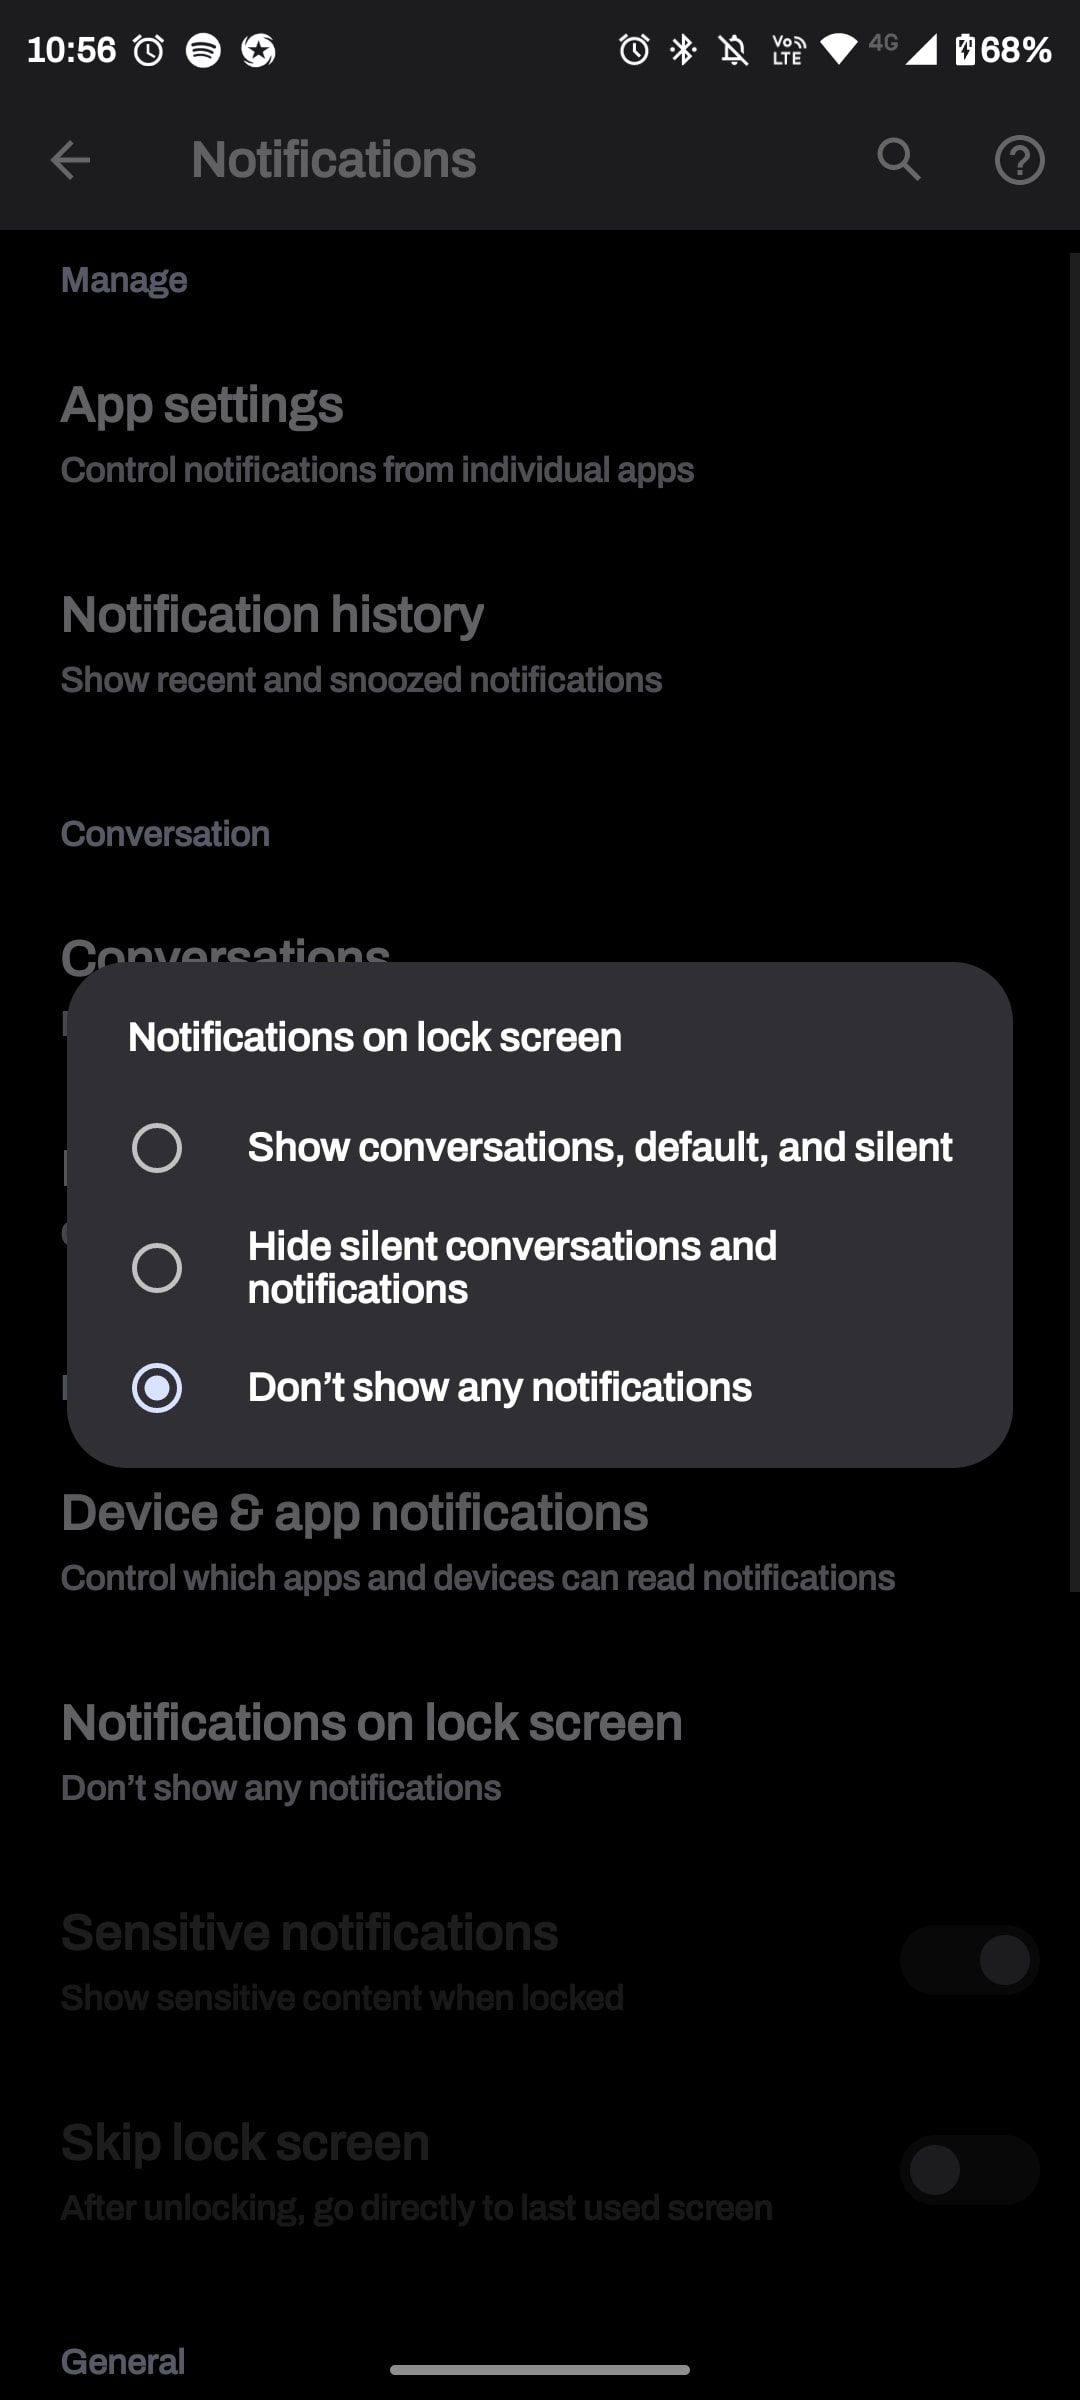 Don't show any notifications selected in notifications on lock screen popup settings